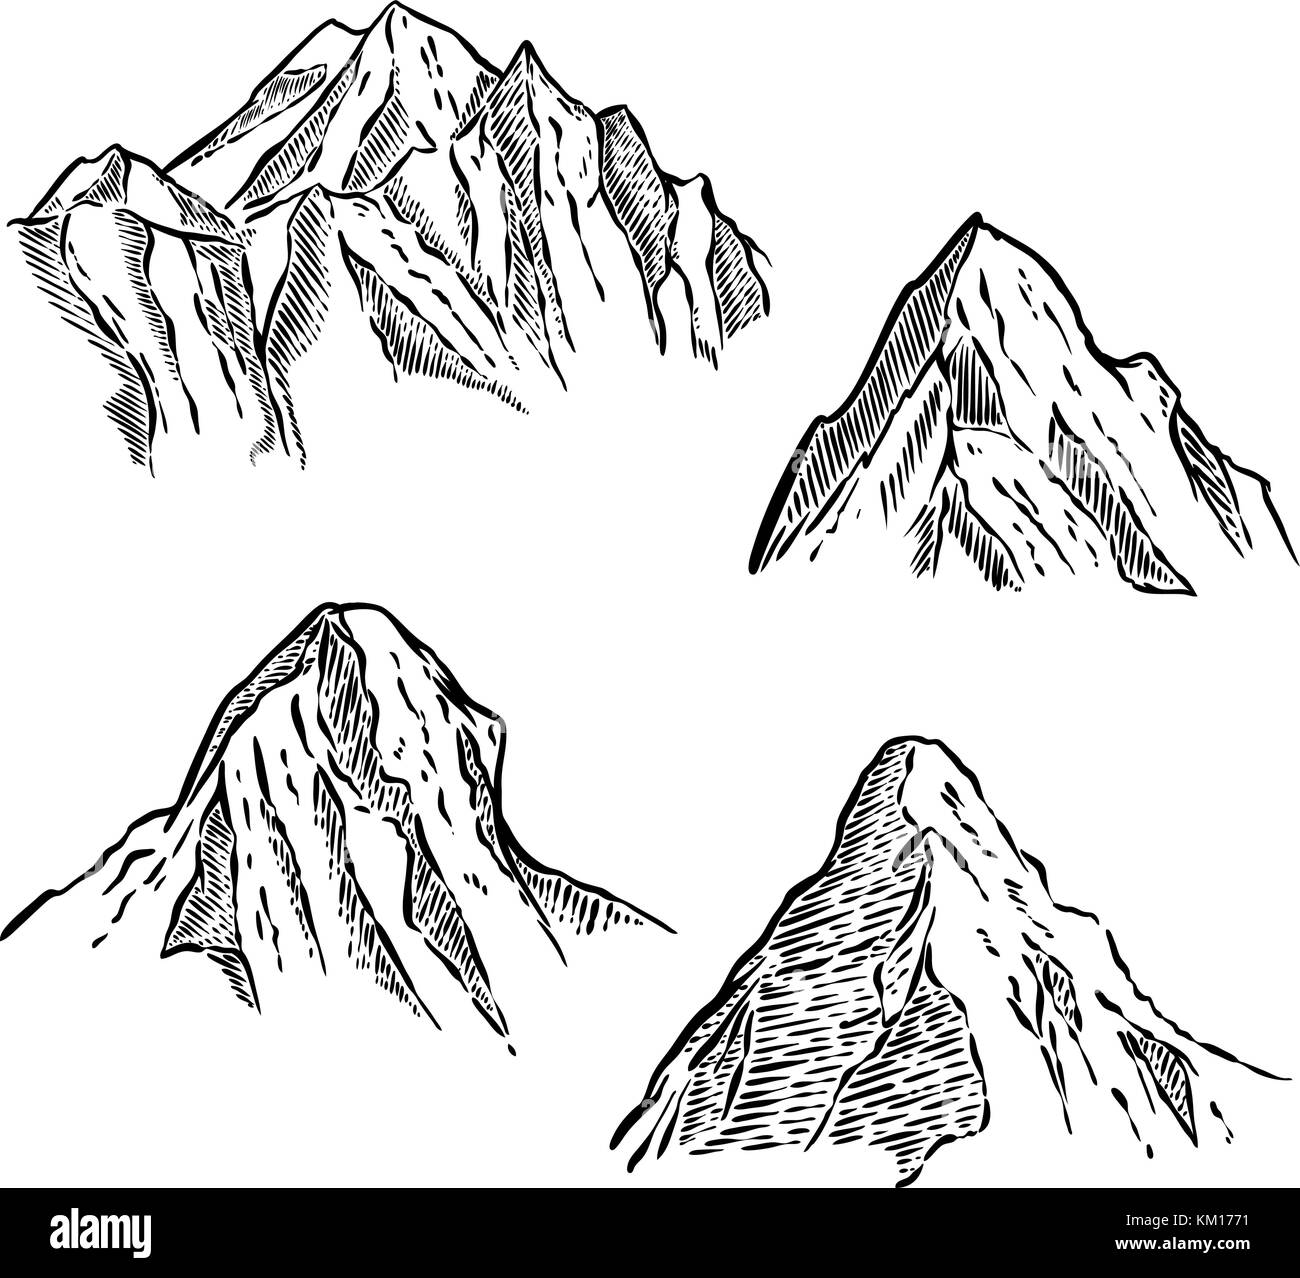 How To Draw Mountain Scenery Easy Step By Step  Drawing Mountain Scenery  For Beginners Very Easy  YouTube